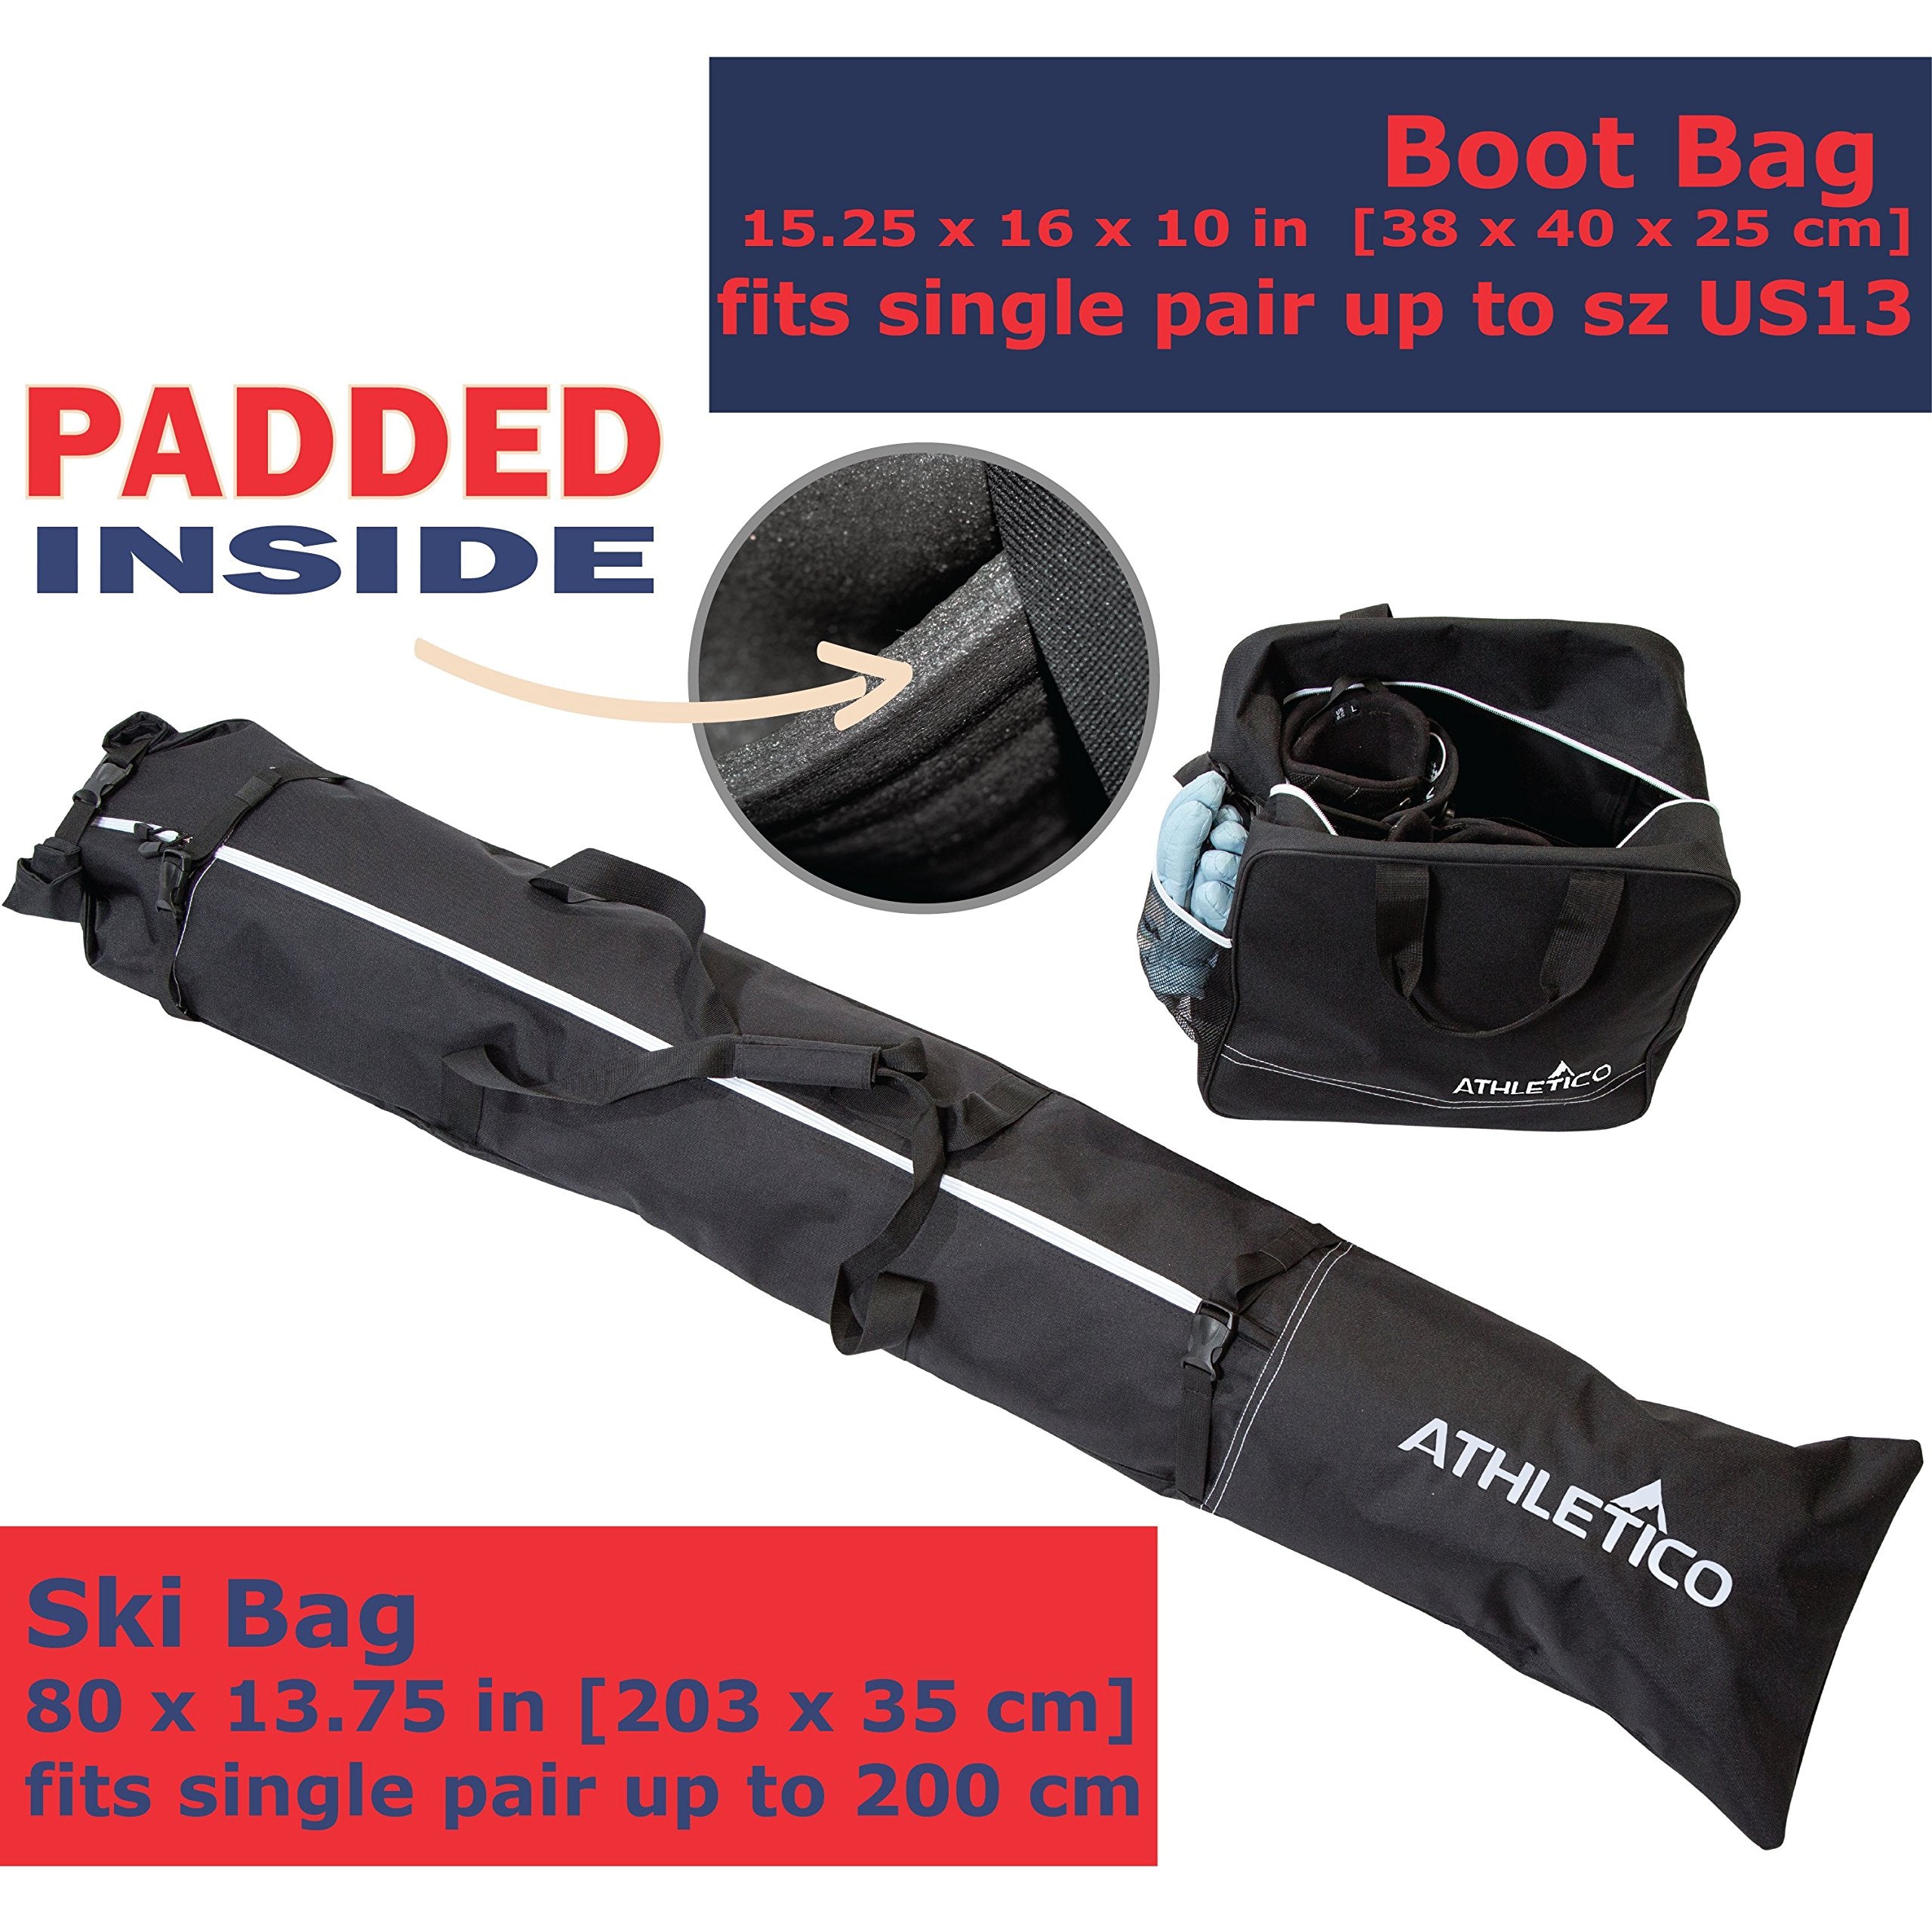 Athletico Padded Two-Piece Ski and Boot Bag Combo | Store & Transport Skis Up to 200 CM and Boots Up To Size 13 | Includes 1 Padded Ski Bag & 1 Padded Ski Boot Bag  - Good